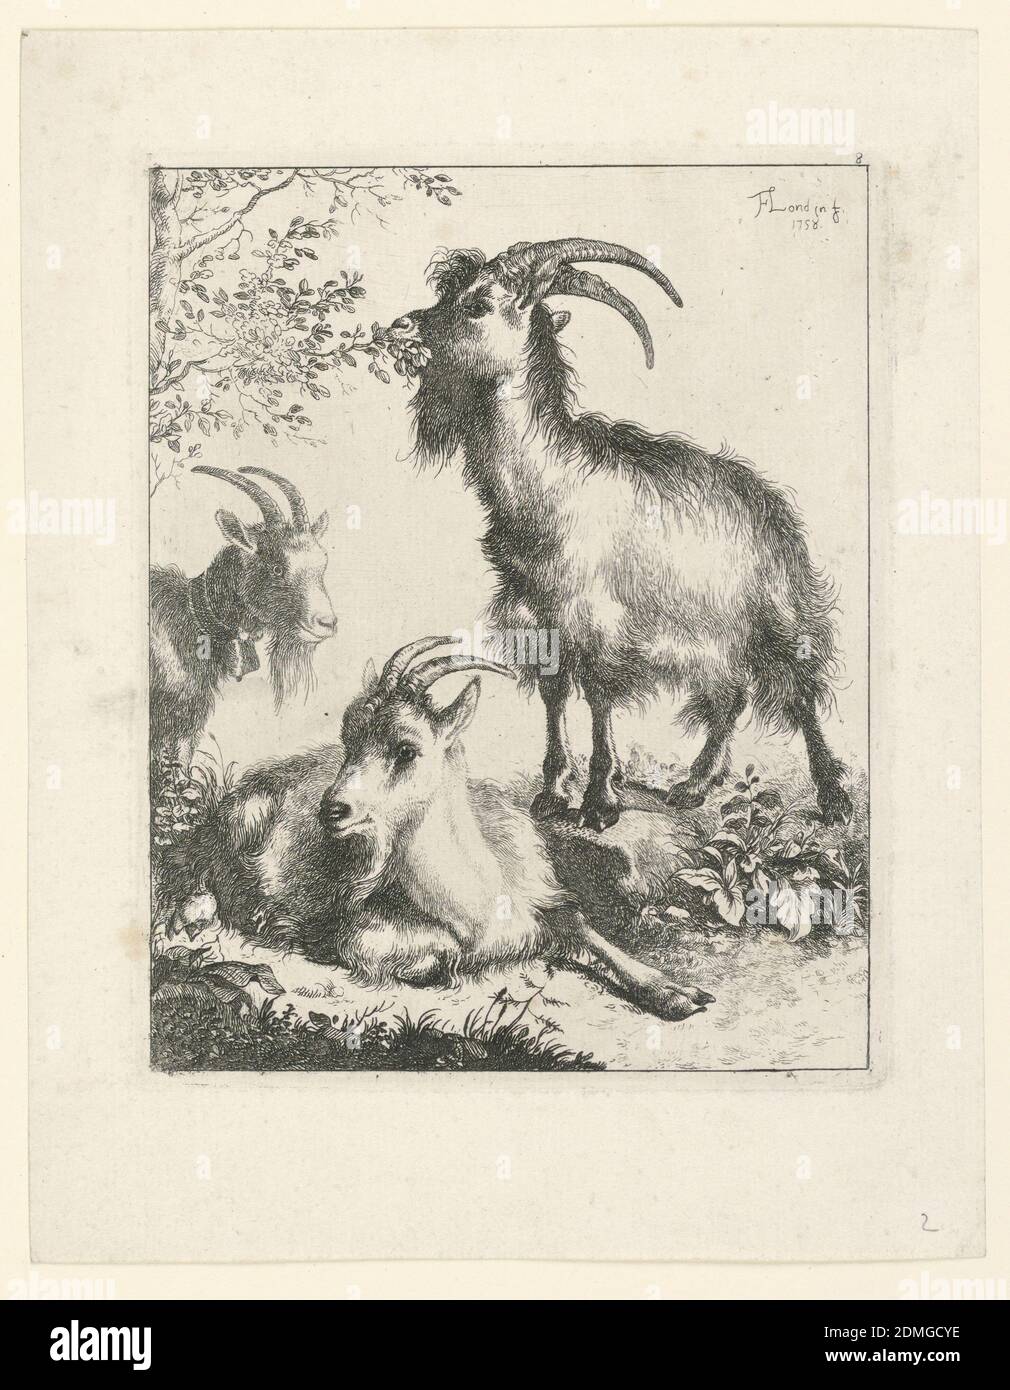 https://c8.alamy.com/comp/2DMGCYE/three-goats-francesco-londonio-italian-1723-1783-engraving-on-paper-a-goat-stands-on-a-rock-and-nibbles-at-a-branch-another-one-lies-upon-the-ground-and-a-third-is-seen-at-the-left-milan-italy-1758-print-2DMGCYE.jpg